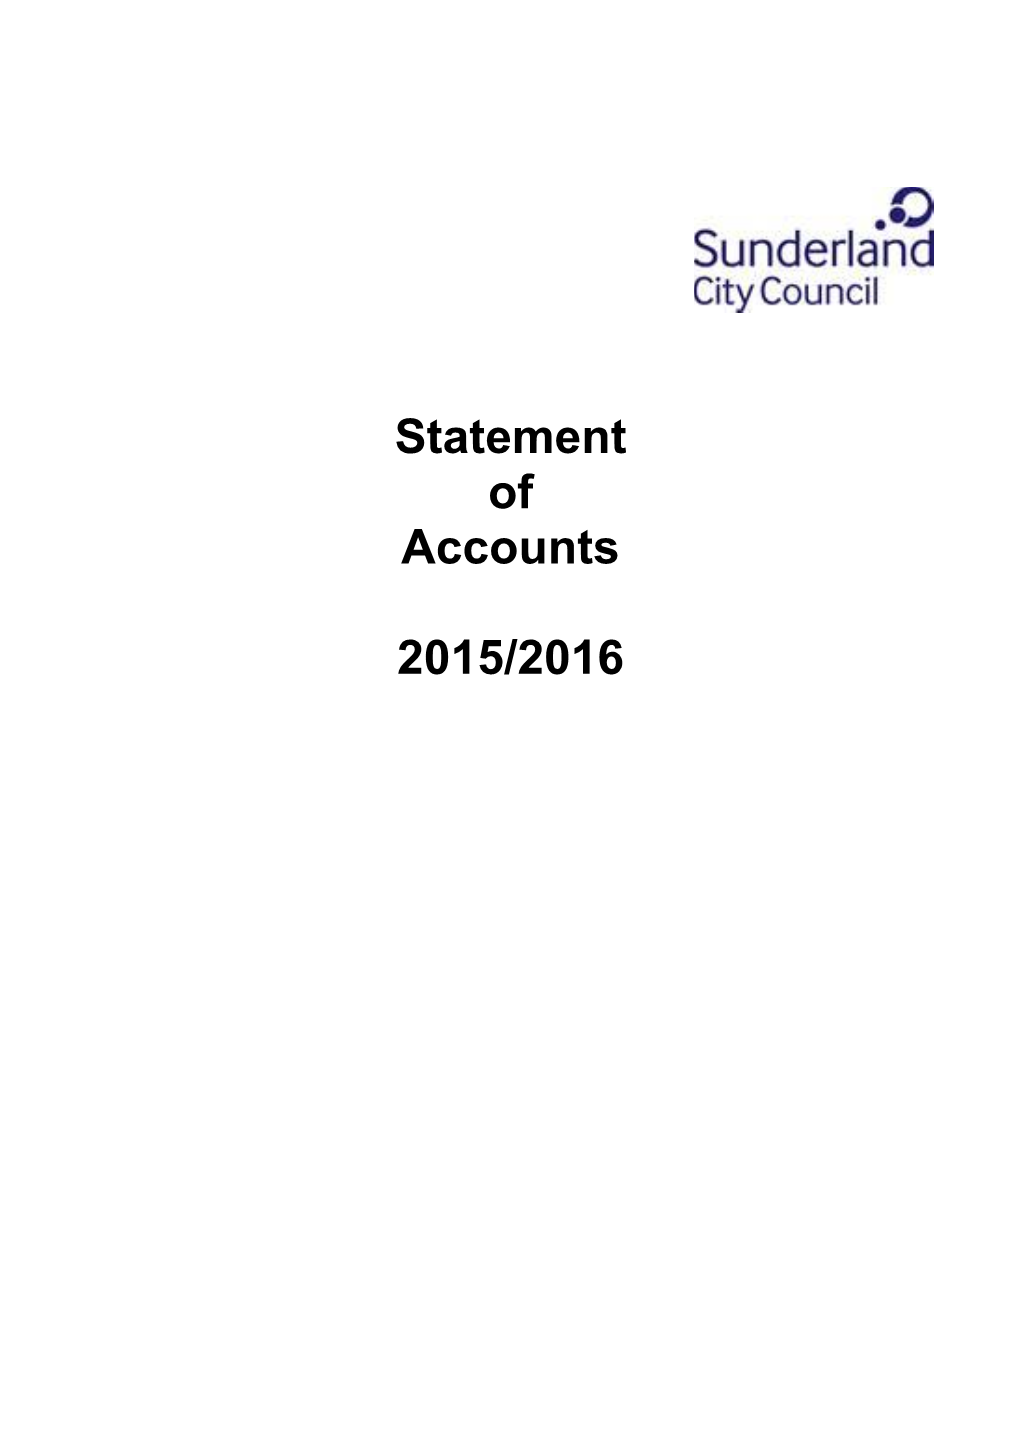 Statement of Accounts 2015/2016 (Subject to Audit) Certification by the Responsible Finance Officer